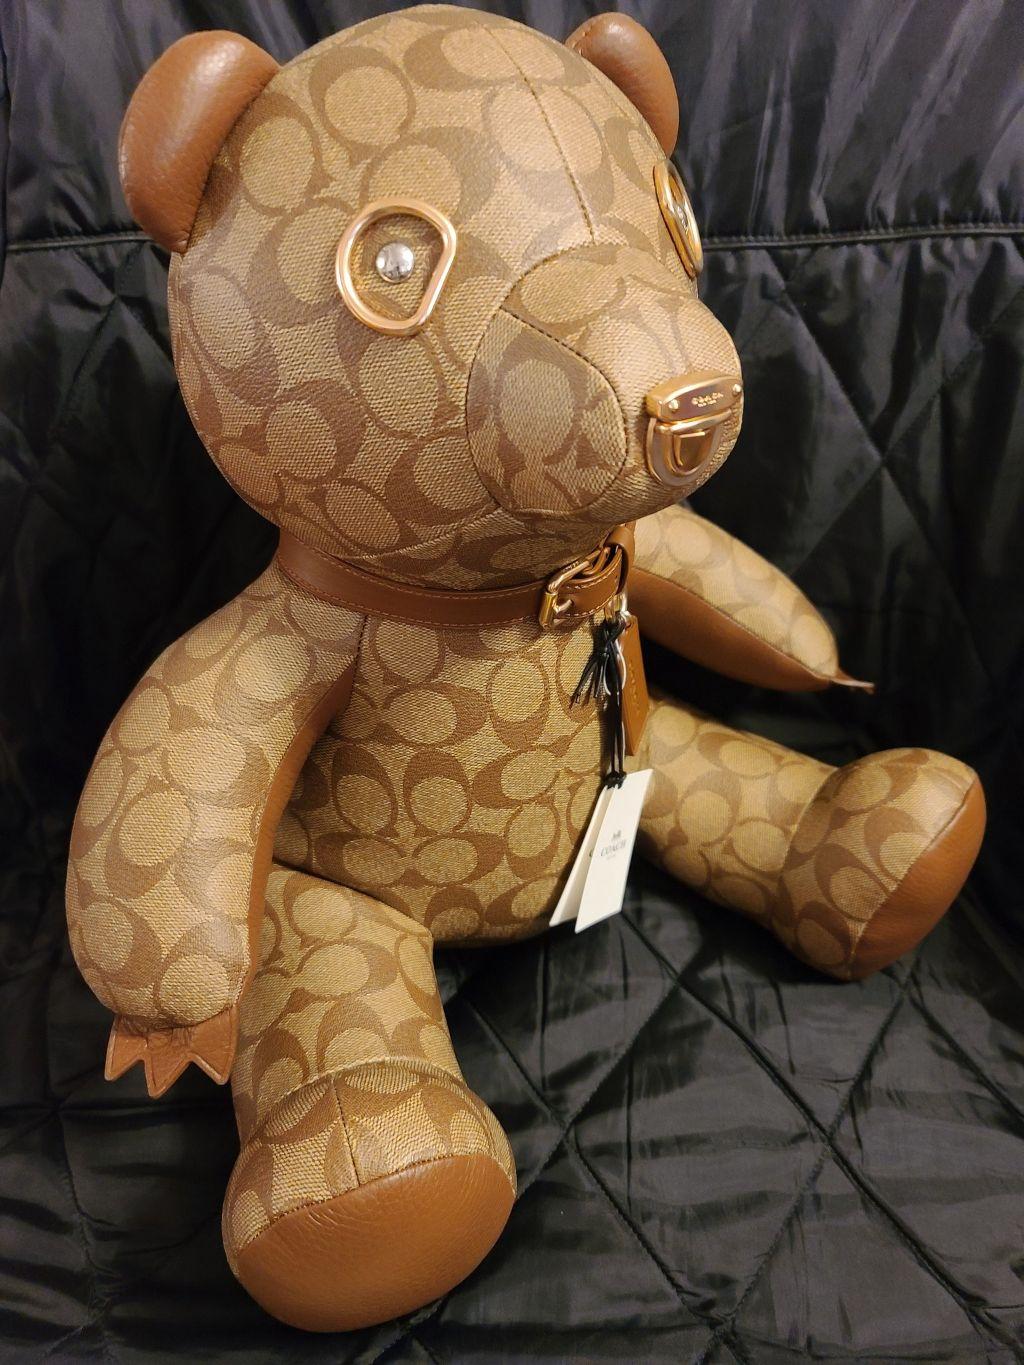 Large Coach Collectible Bear Signed by Mr. Shatner